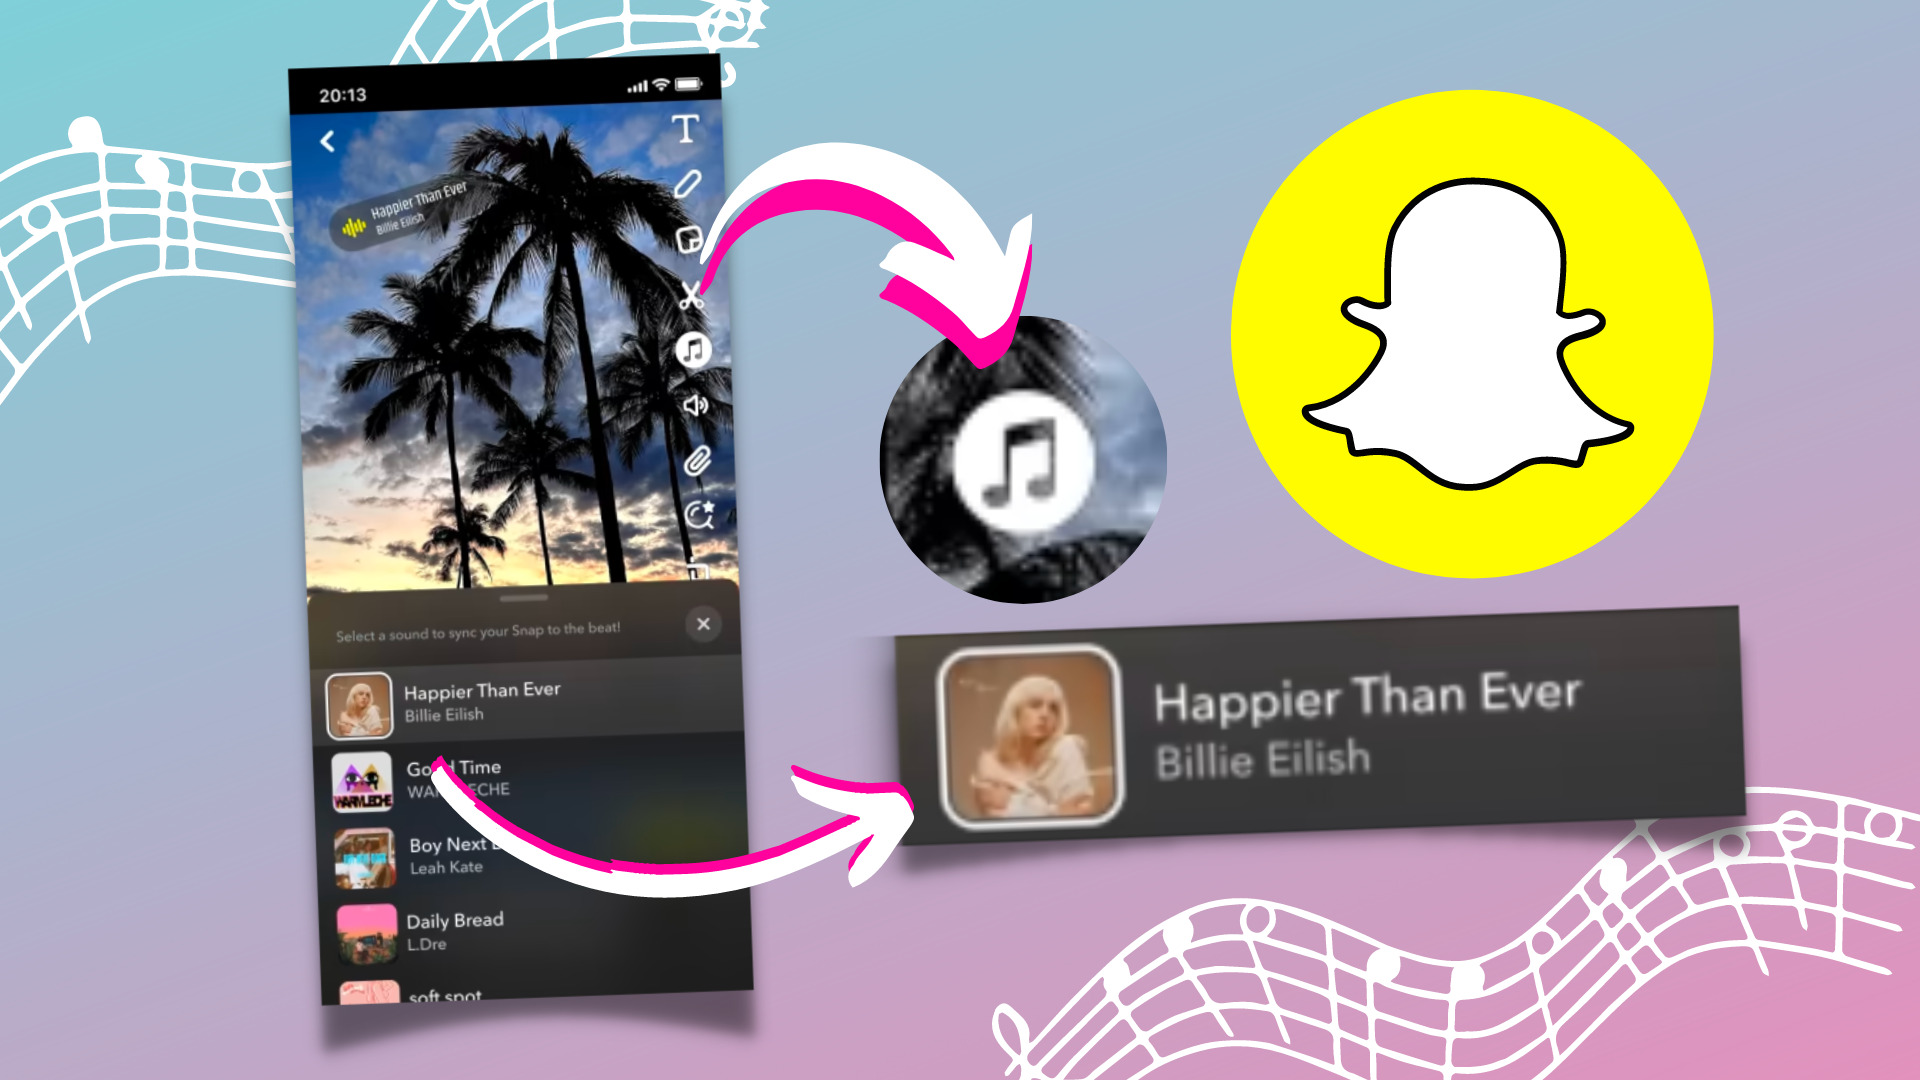 snapchat-adds-a-bunch-of-new-sounds-to-its-creative-toolset